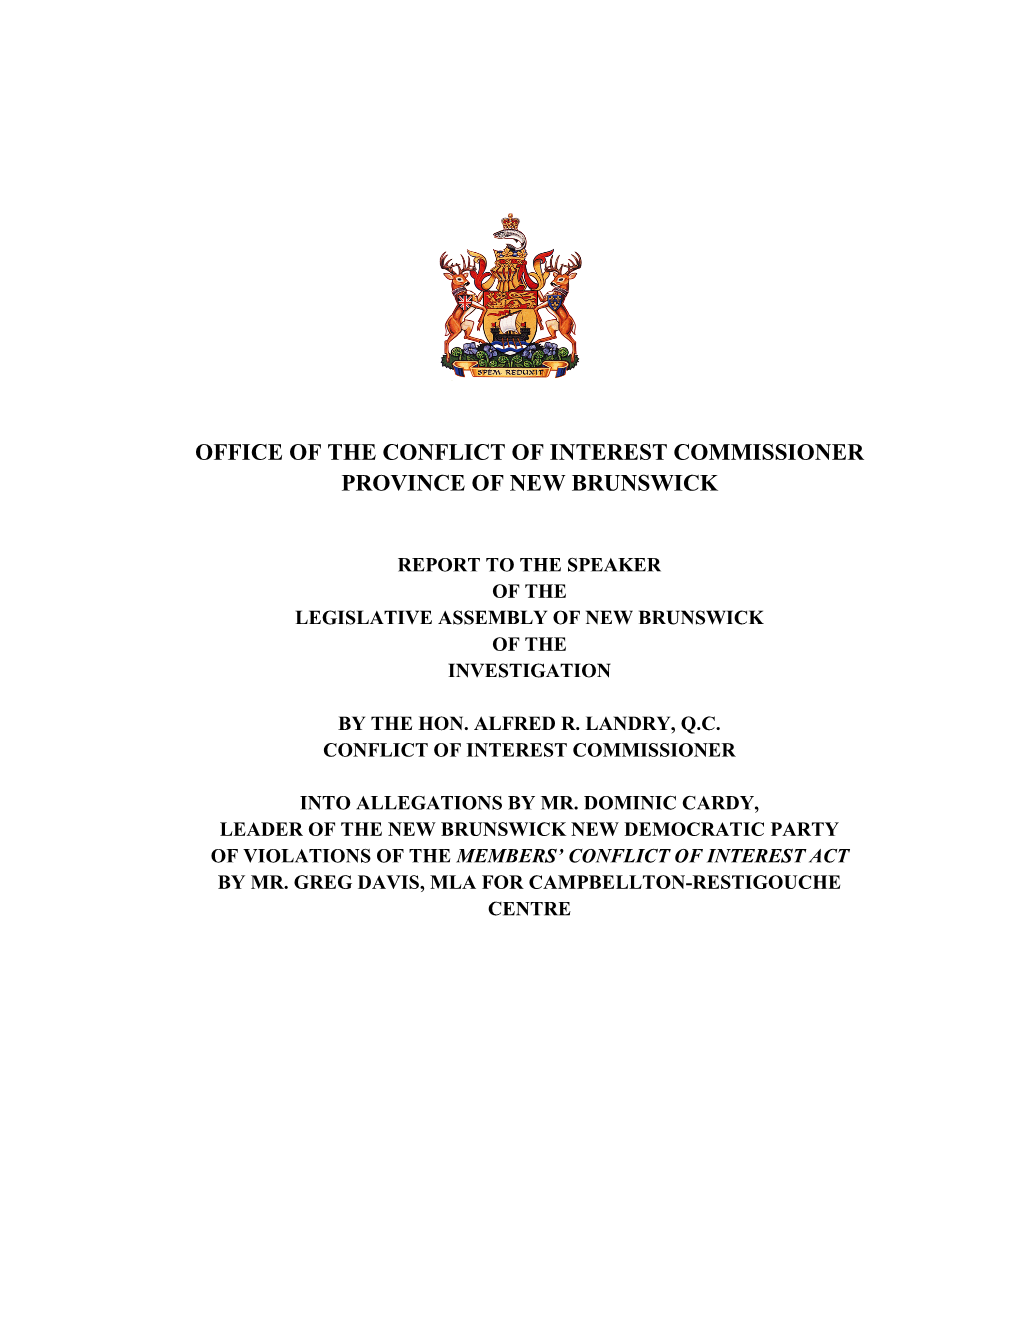 Report to the Speaker of the Legislative Assembly of New Brunswick of the Investigation